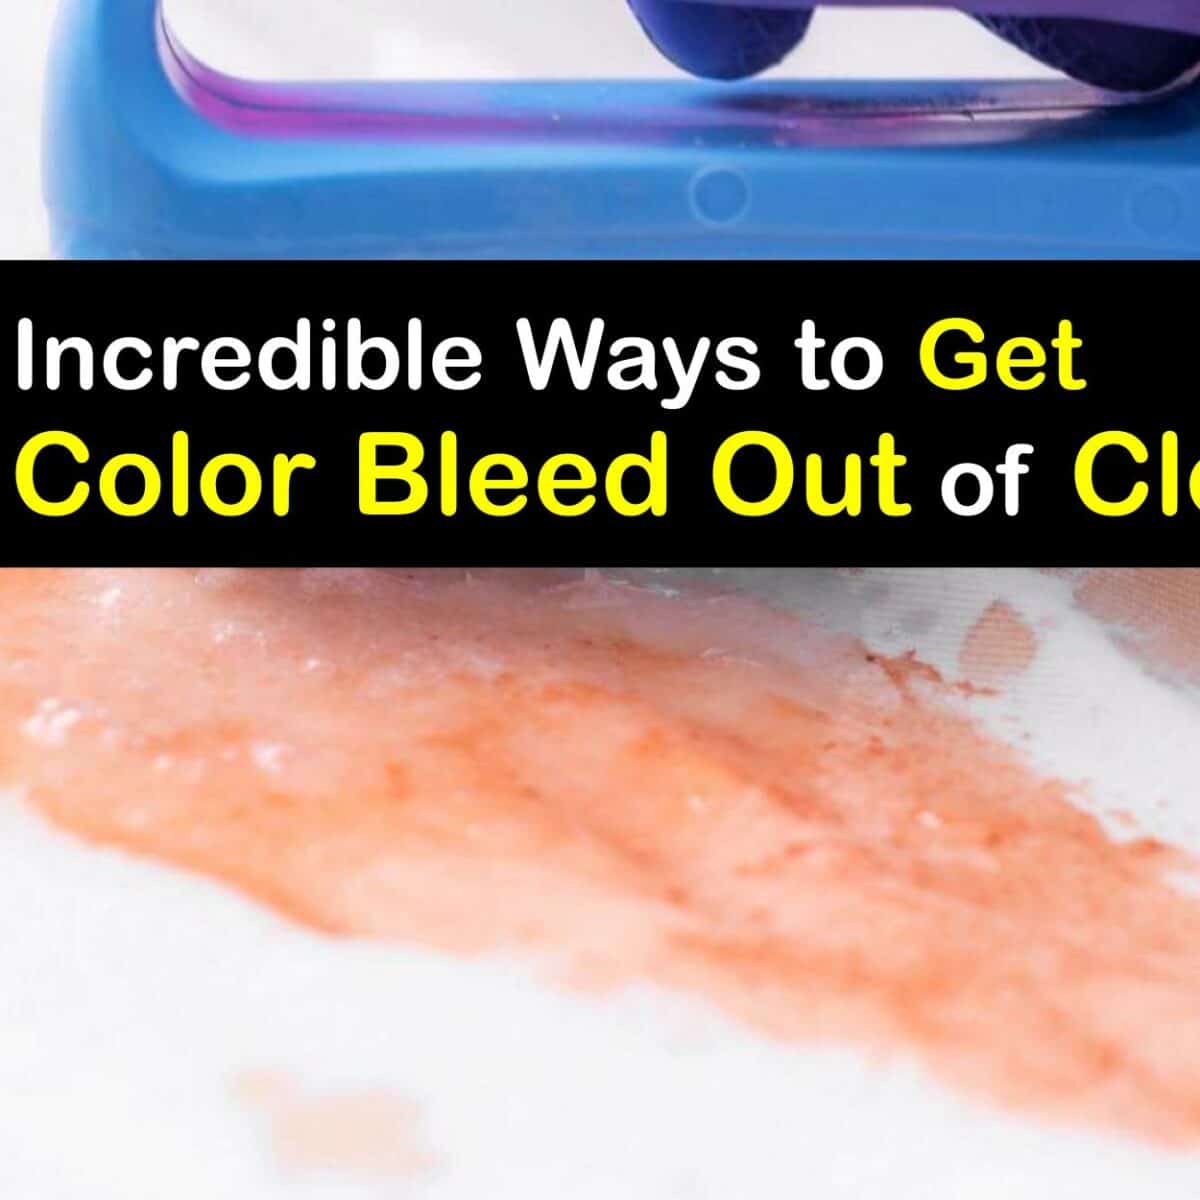 Color Bleed Stains - Getting Color Bleeding Out of Clothes